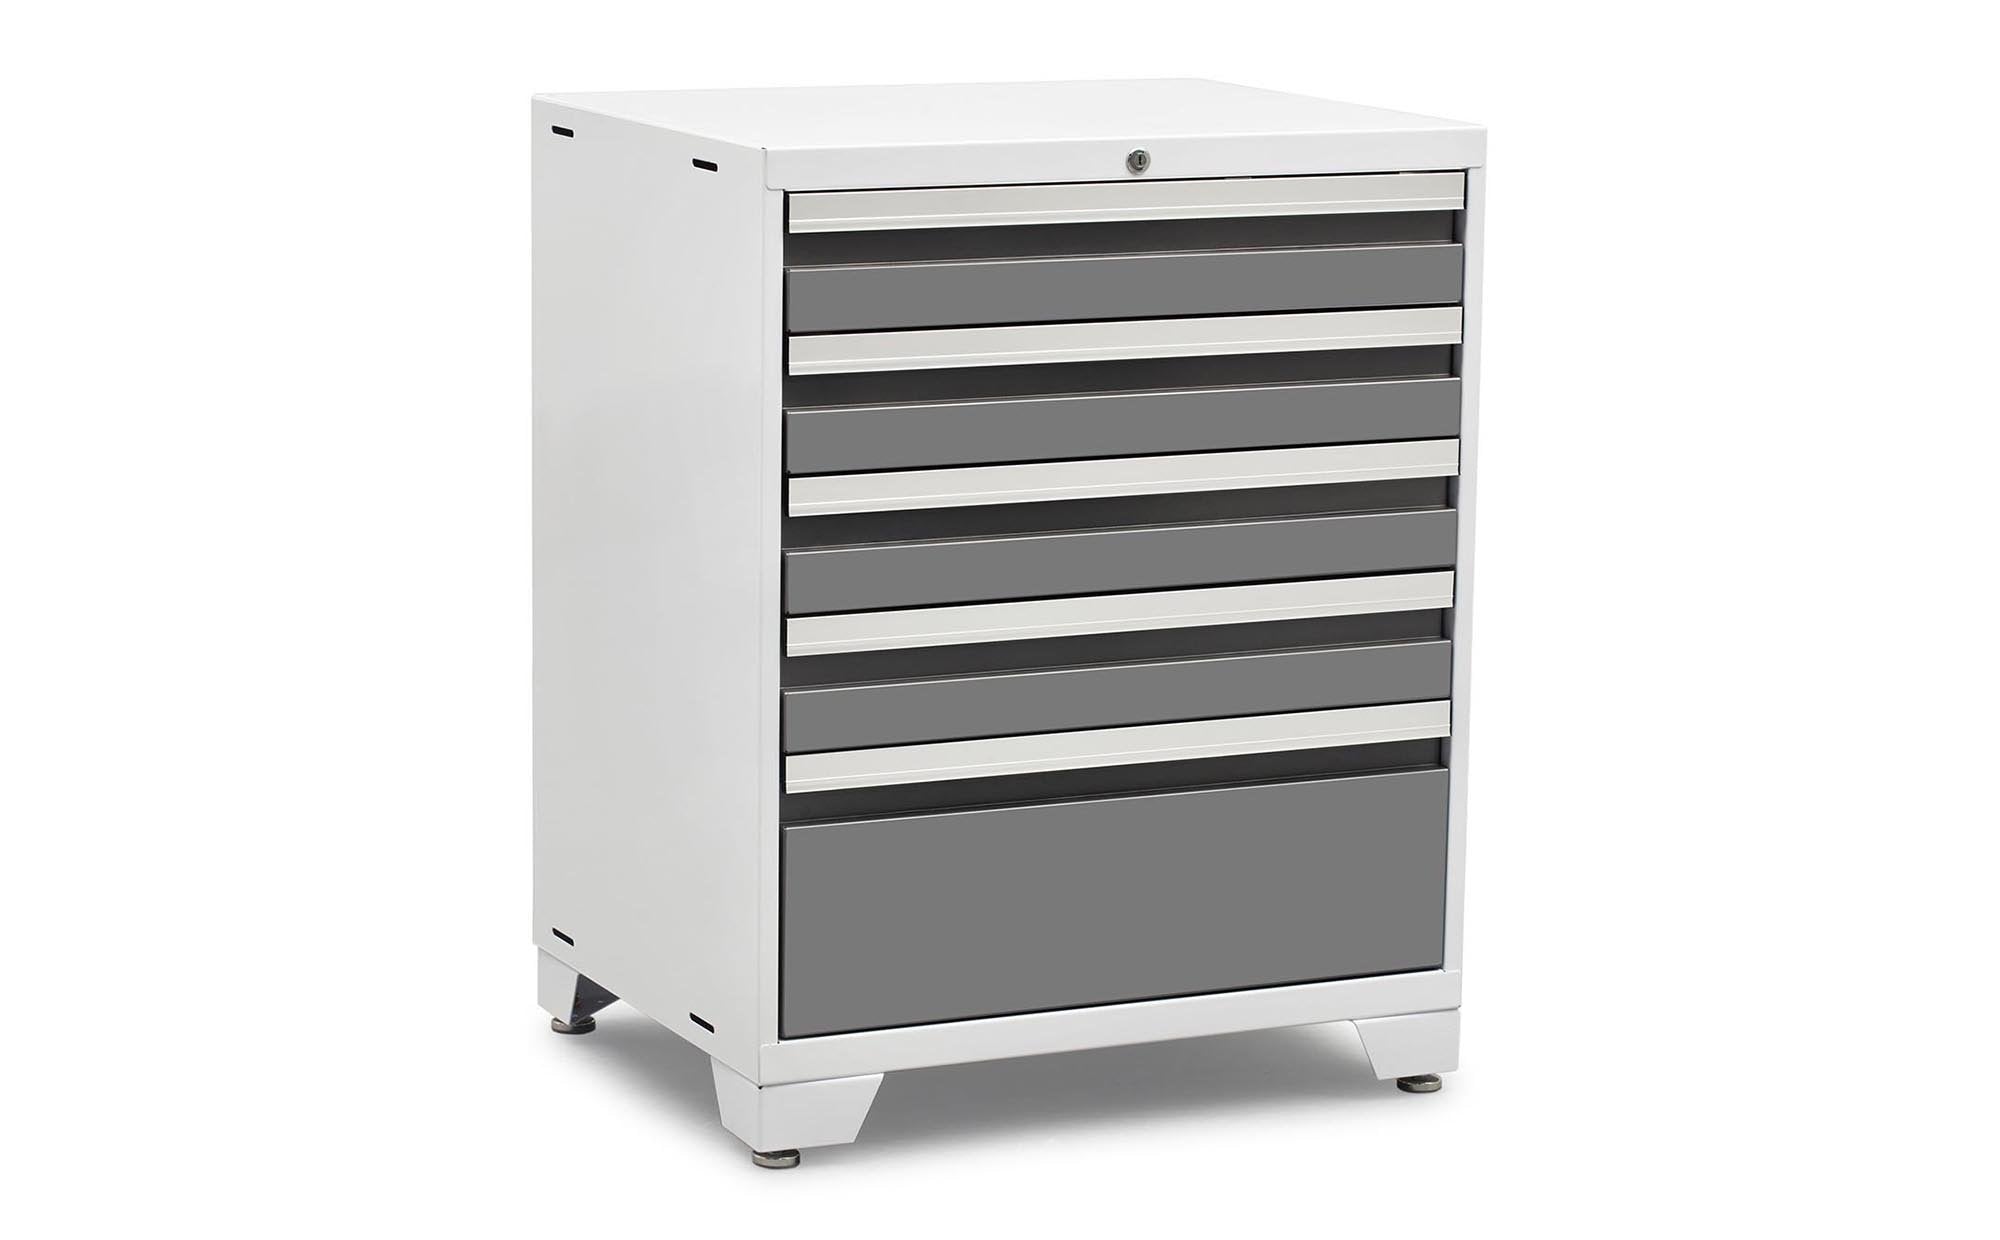 PRO SERIES INDIVIDUAL CABINETS